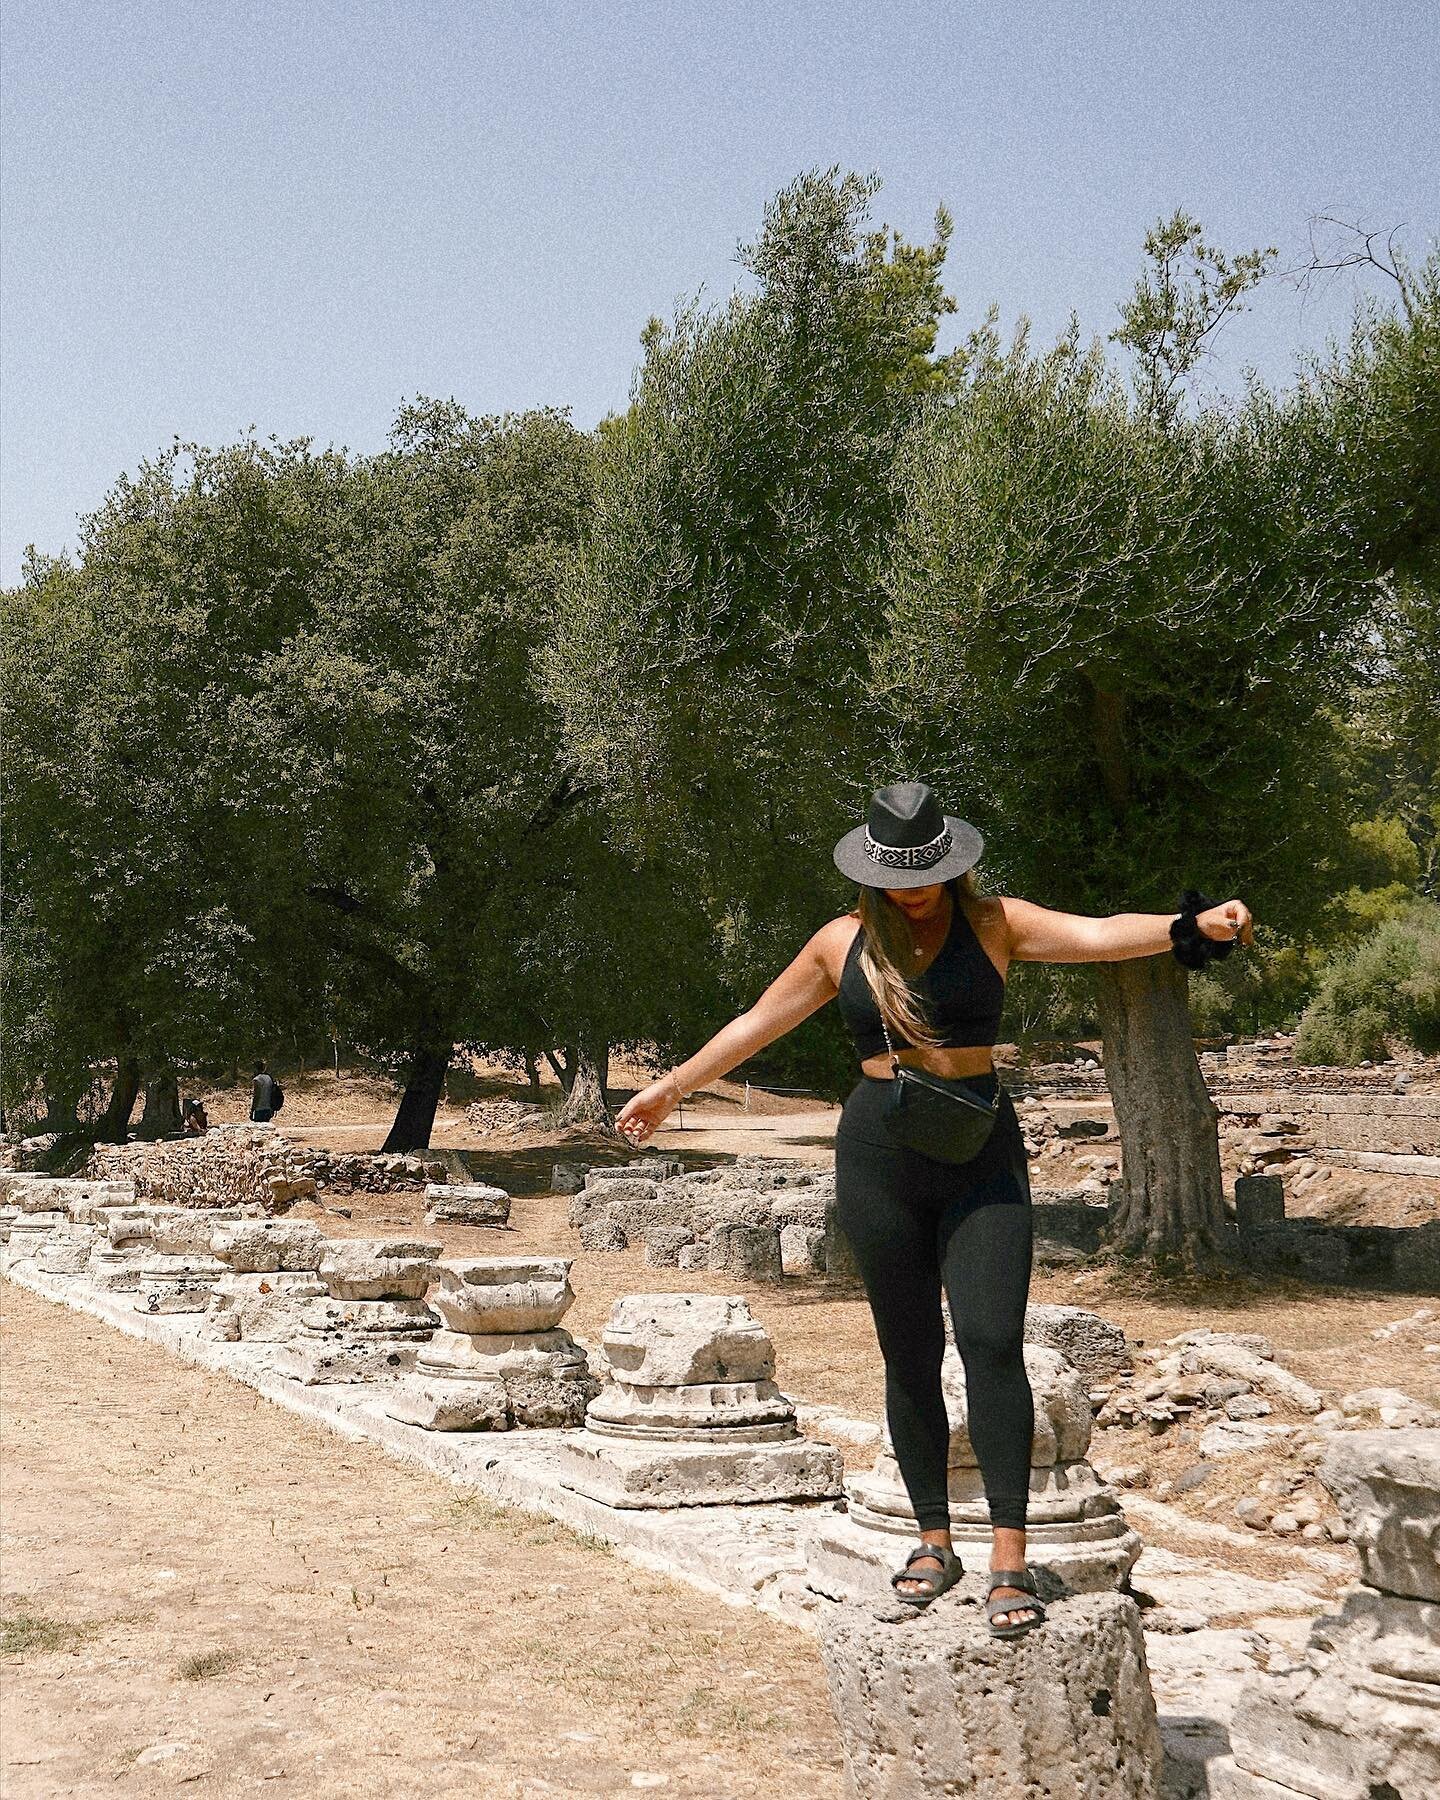 Indiana Jones goes to Olympia 🇬🇷 #ArianaApproved